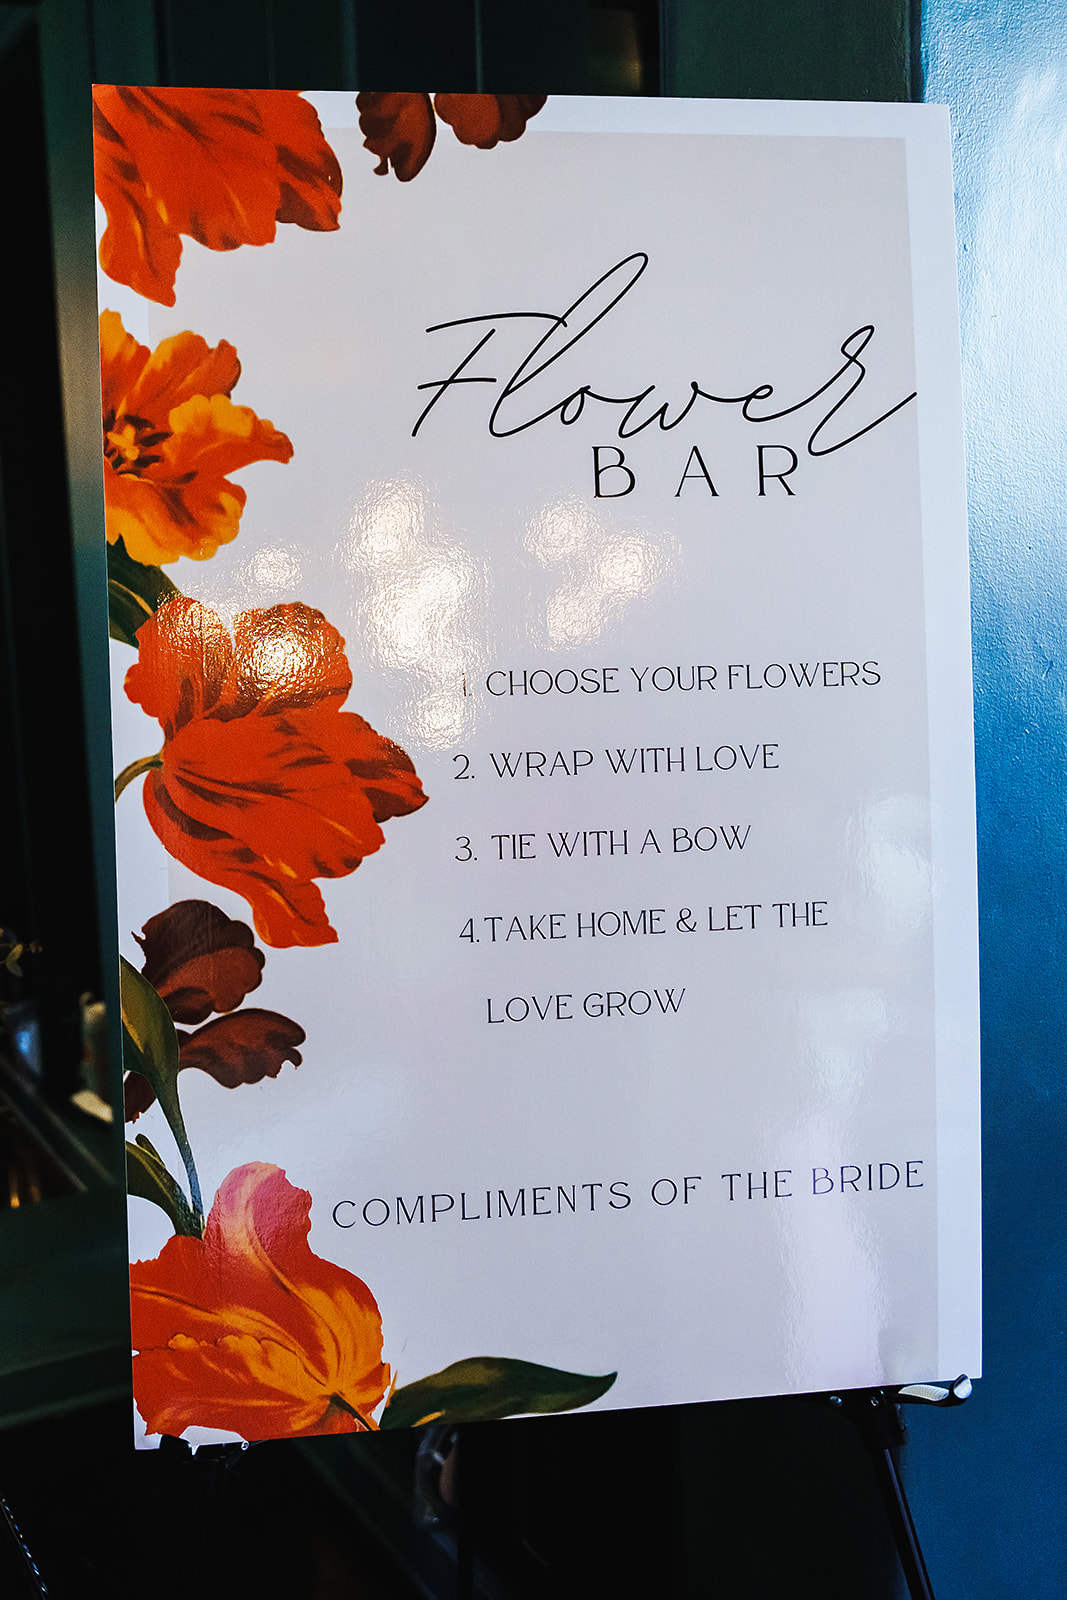 Flower bar at a vibrant wedding shower in Los Angeles, California